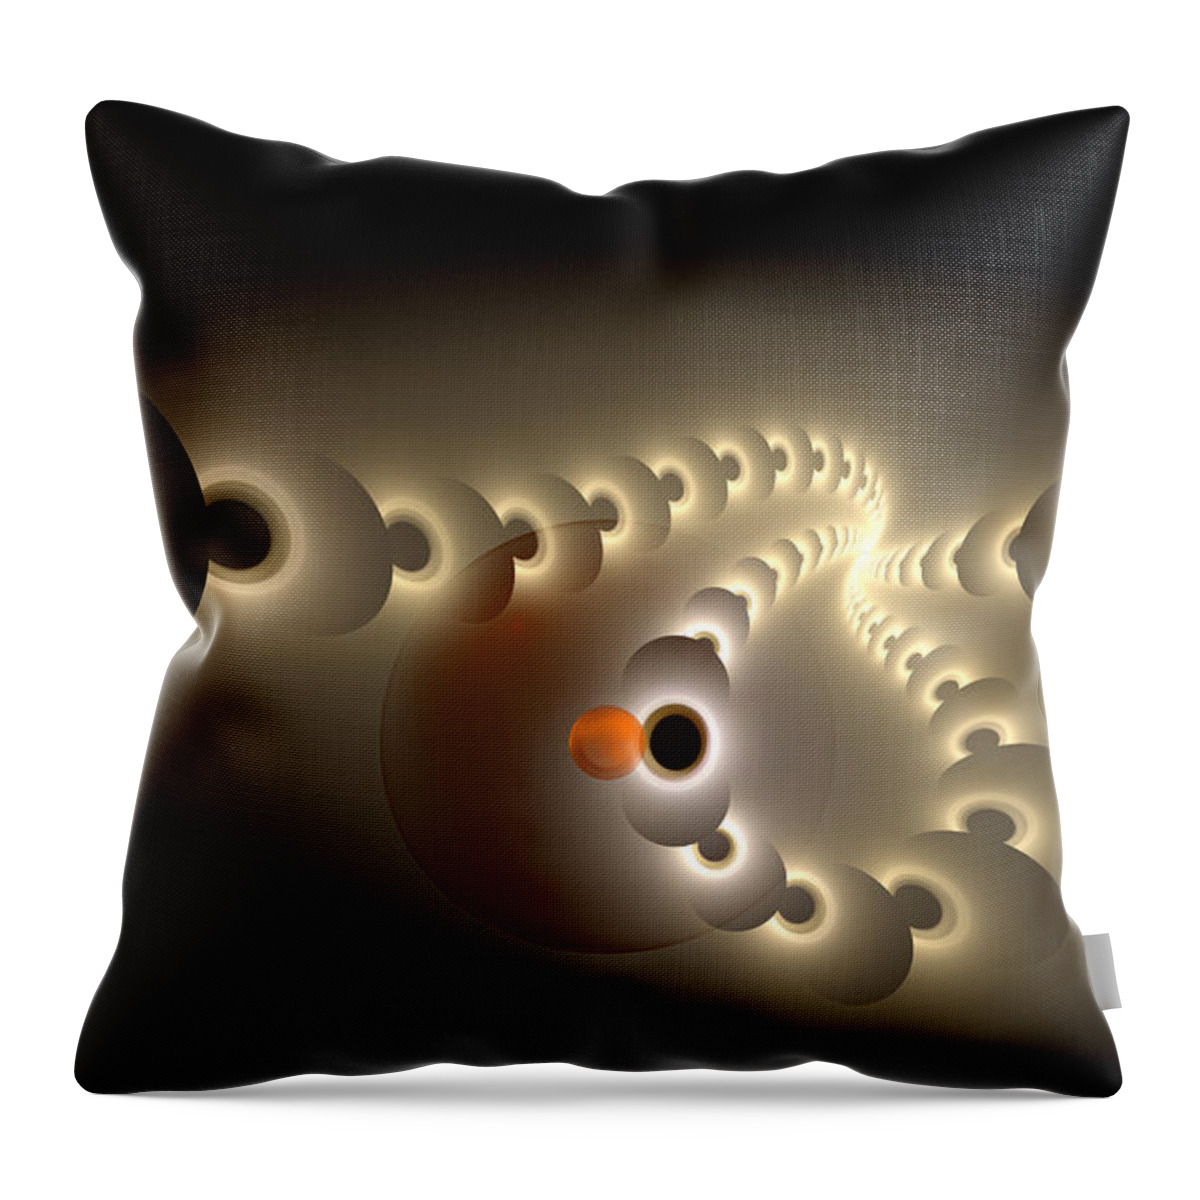 Fractal Throw Pillow featuring the digital art Pulse Eject by Gary Blackman